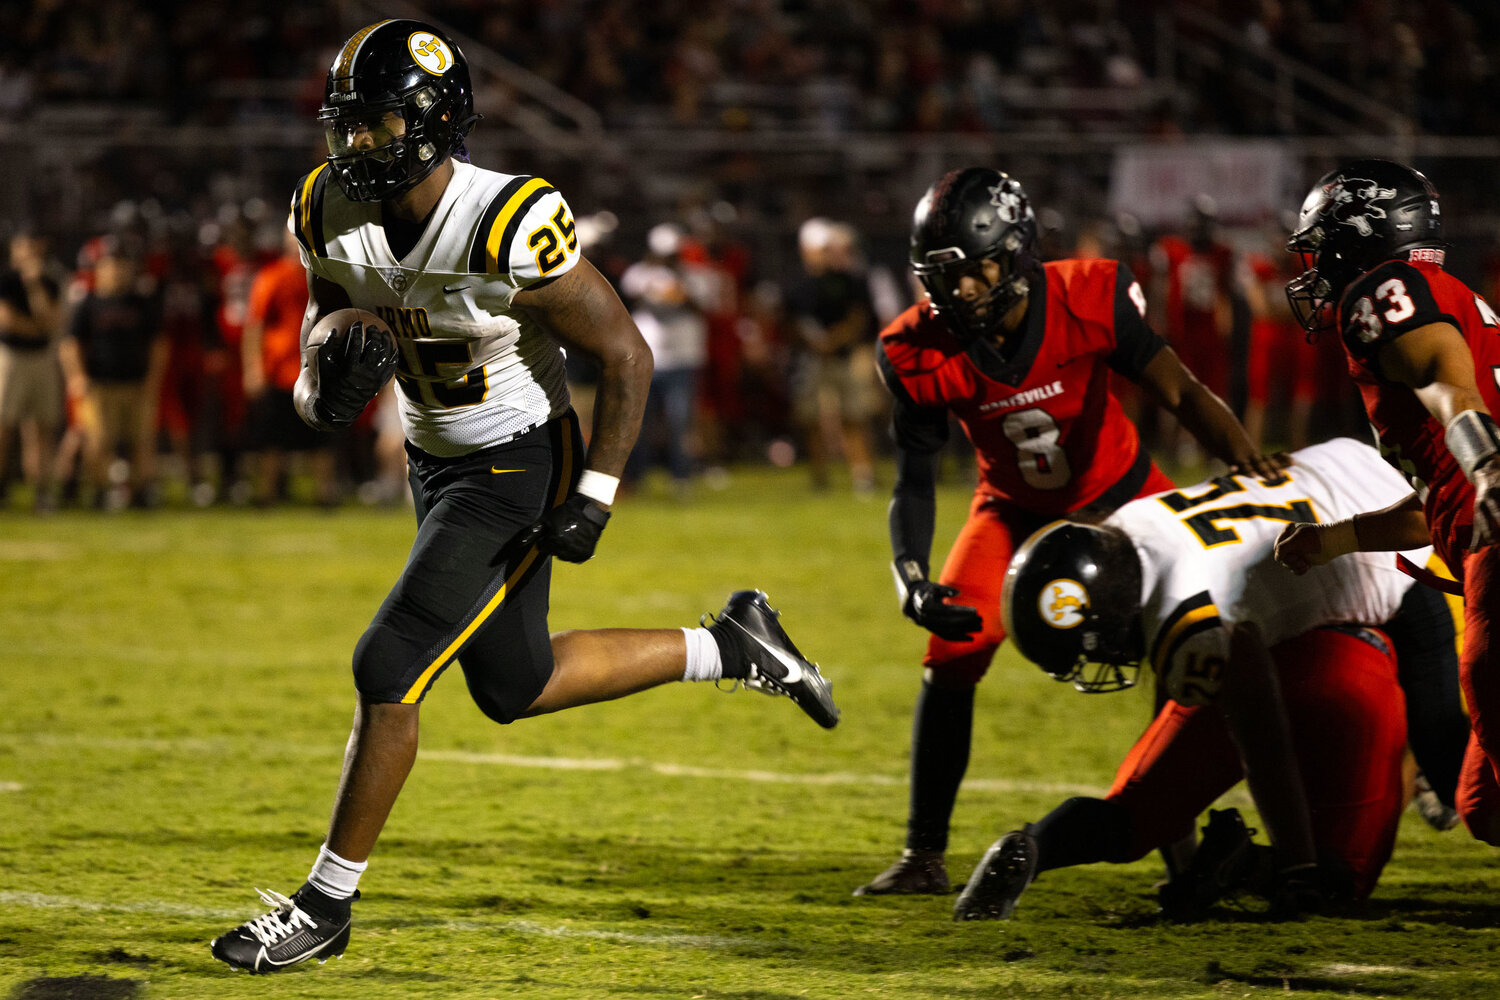 Irmo's Jaden Allen-Hendrix was voted male Athlete of the Week after his four touchdown performance against Hartsville.